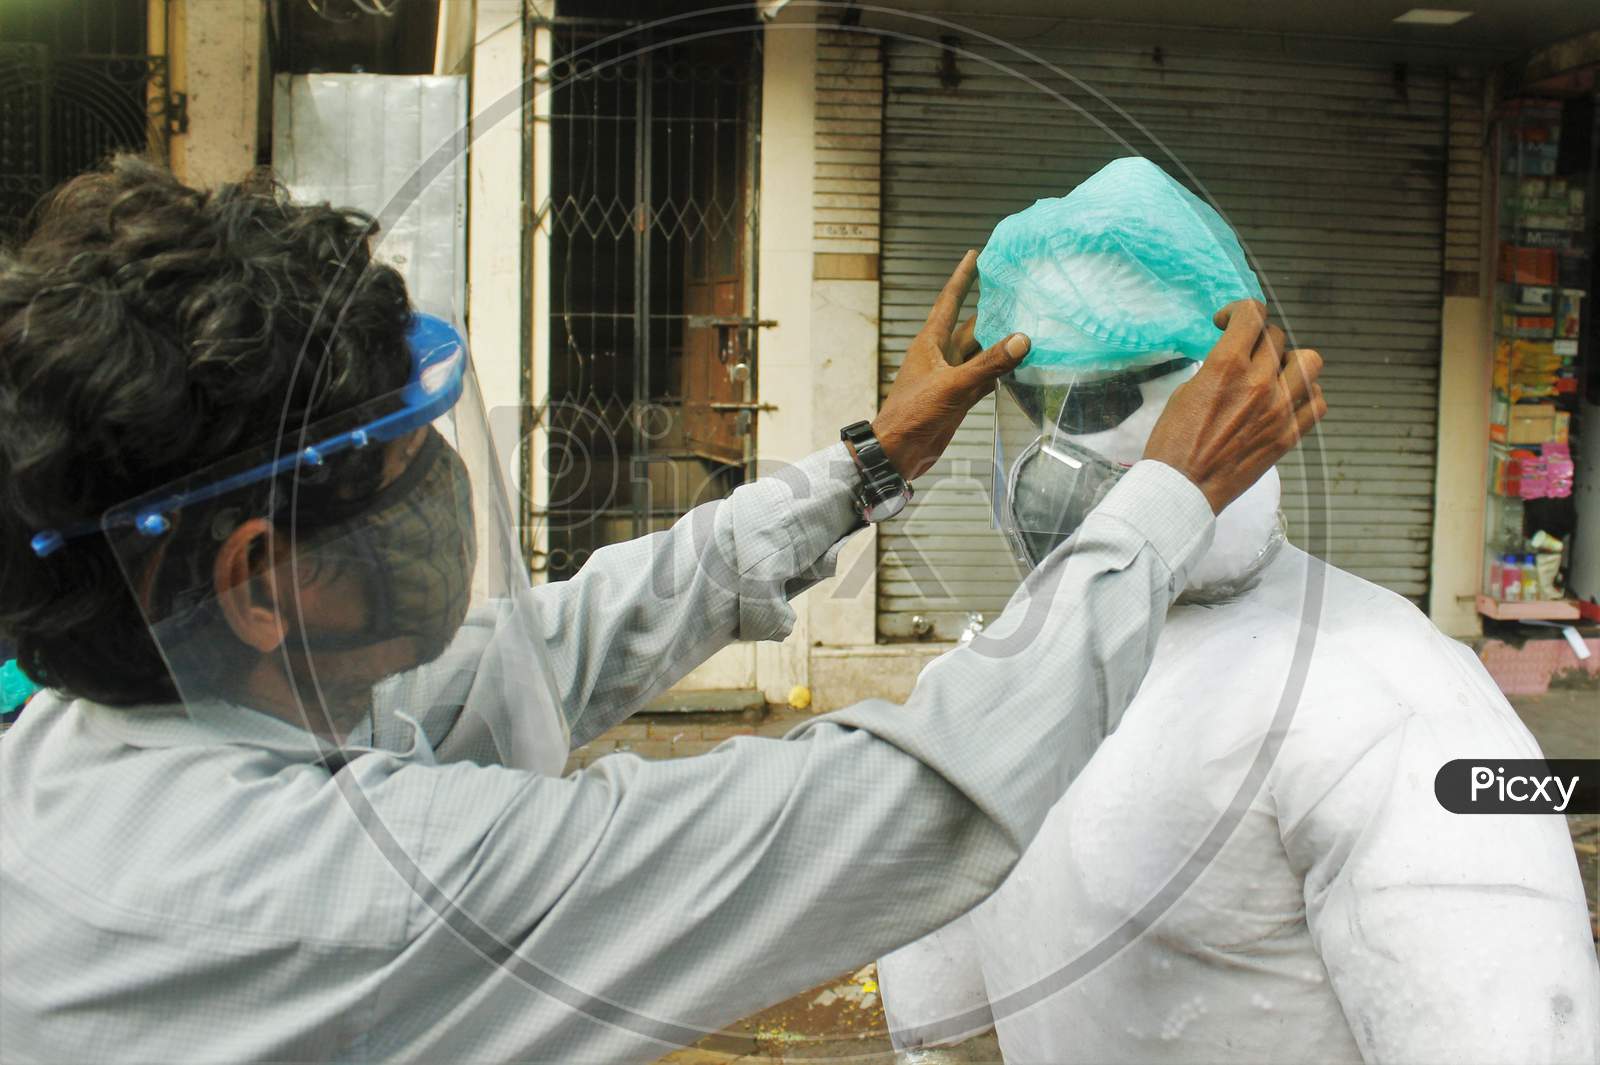 A shopkeeper adjusts the cap of a PPE kit makeshift mannequin, in Mumbai, India on June 20, 2020.